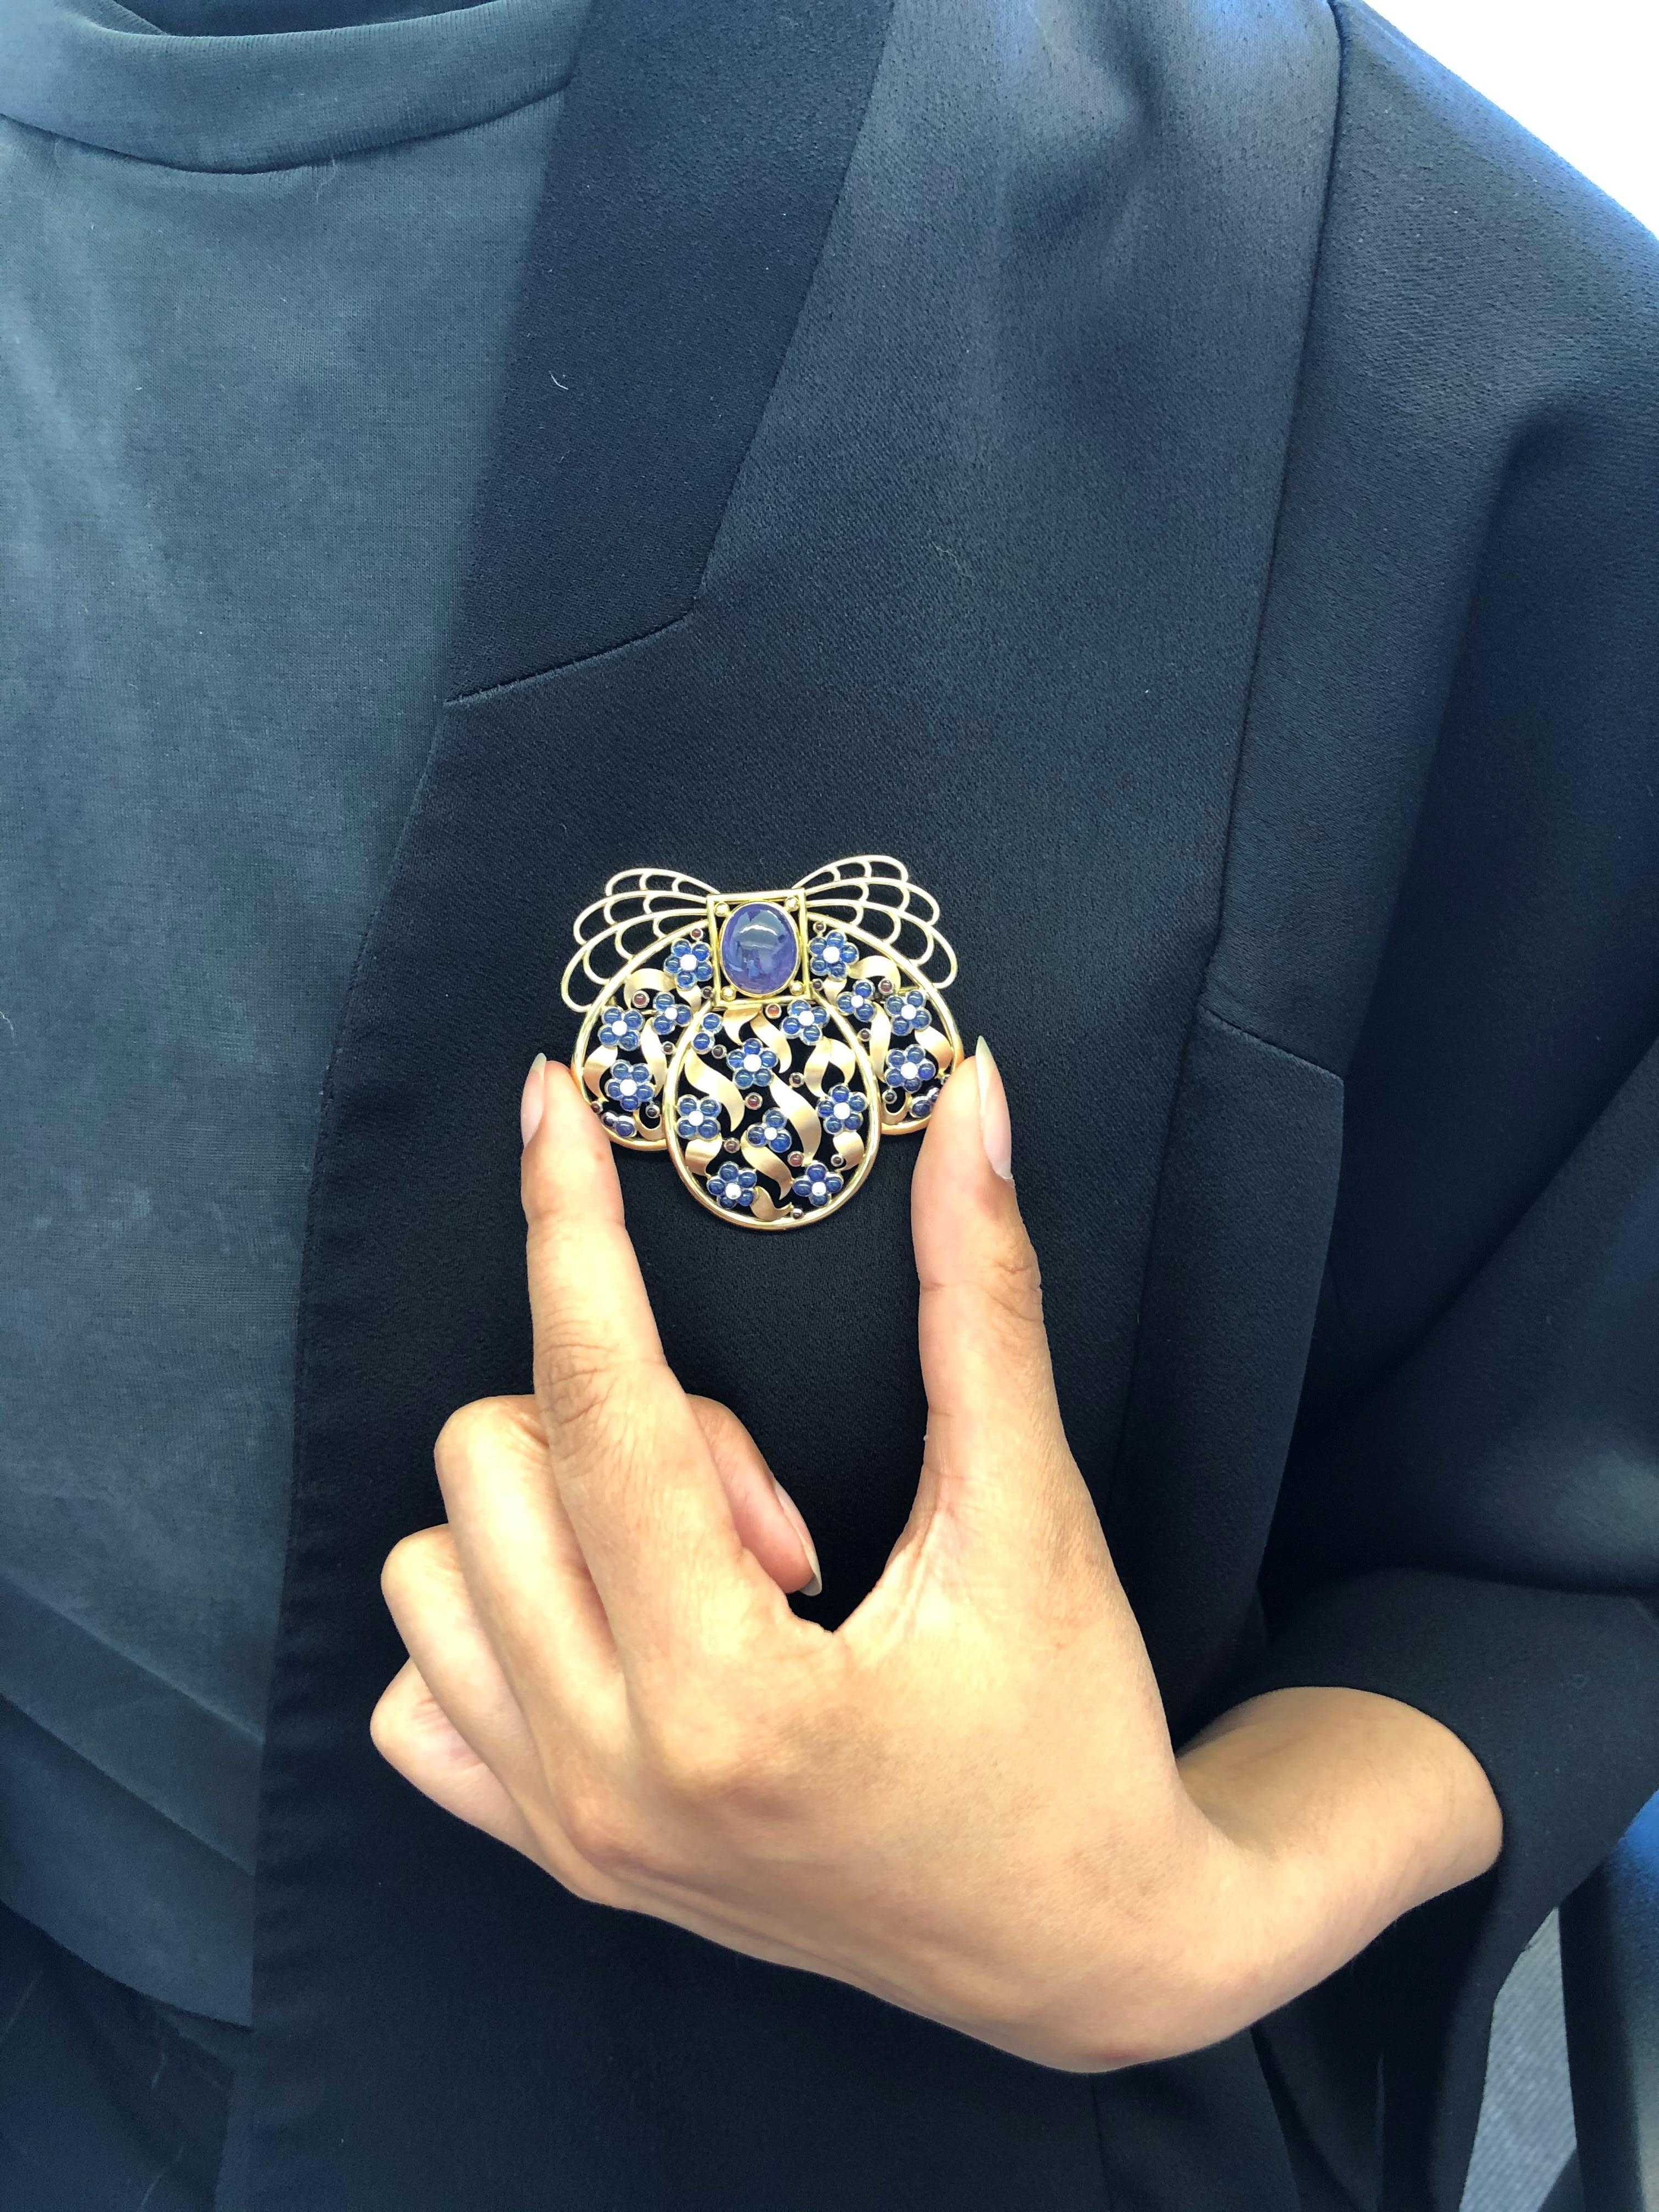 Artist Unique Sapphire and Diamond Brooch by Meister in 18 Karat Gold